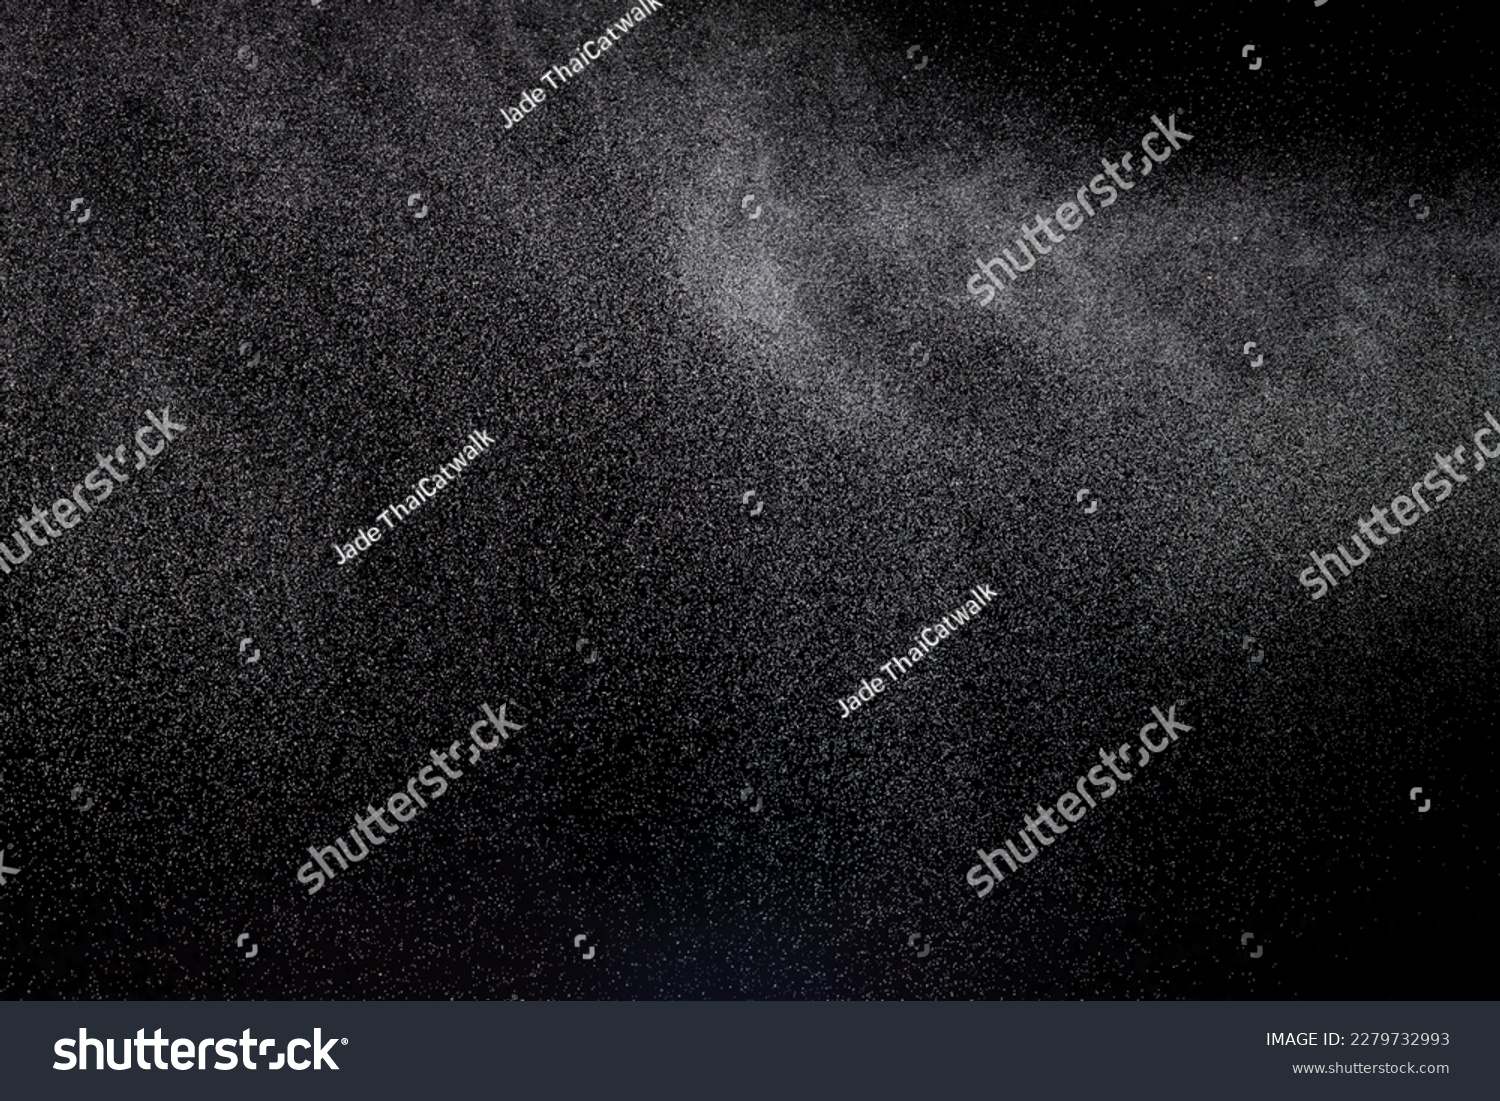 Million of Star Dust, Photo image of falling down shower rain snow, heavy snows storm flying. Freeze shot on black background isolated overlay. Spray water fog smoke as star particle on wind #2279732993